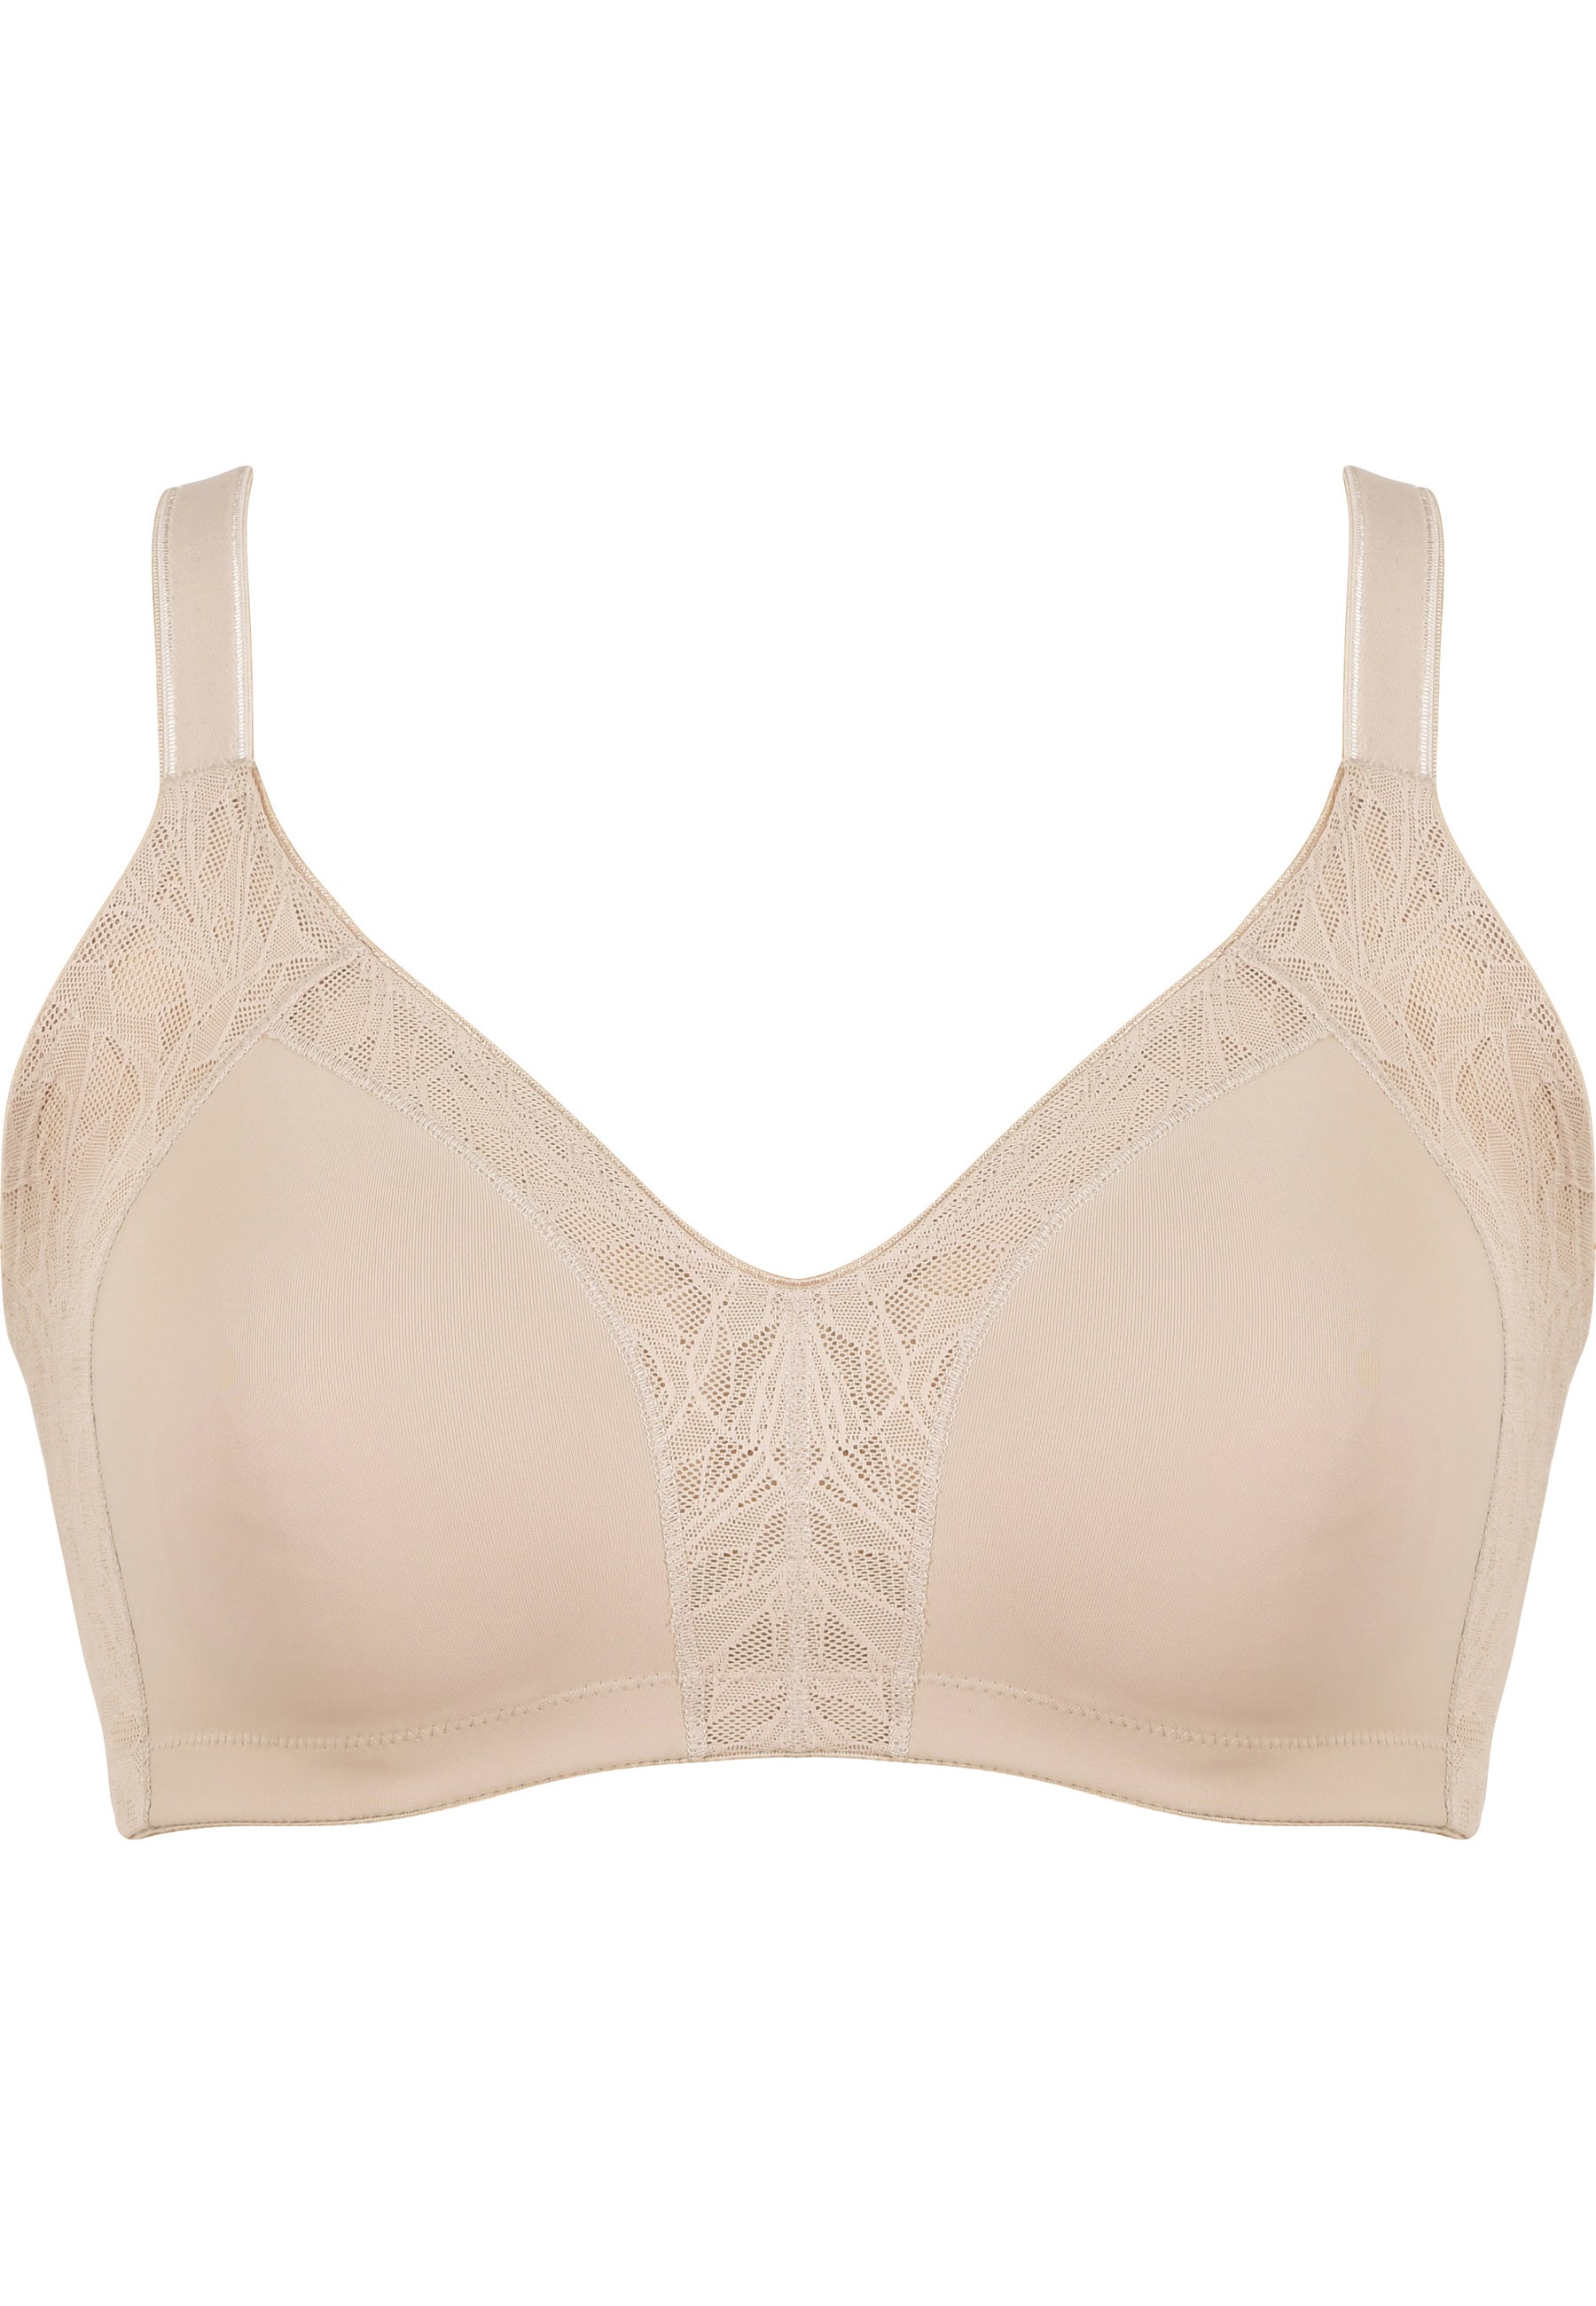 Minimizer and Side Smoother Bra with Lace - Light Beige